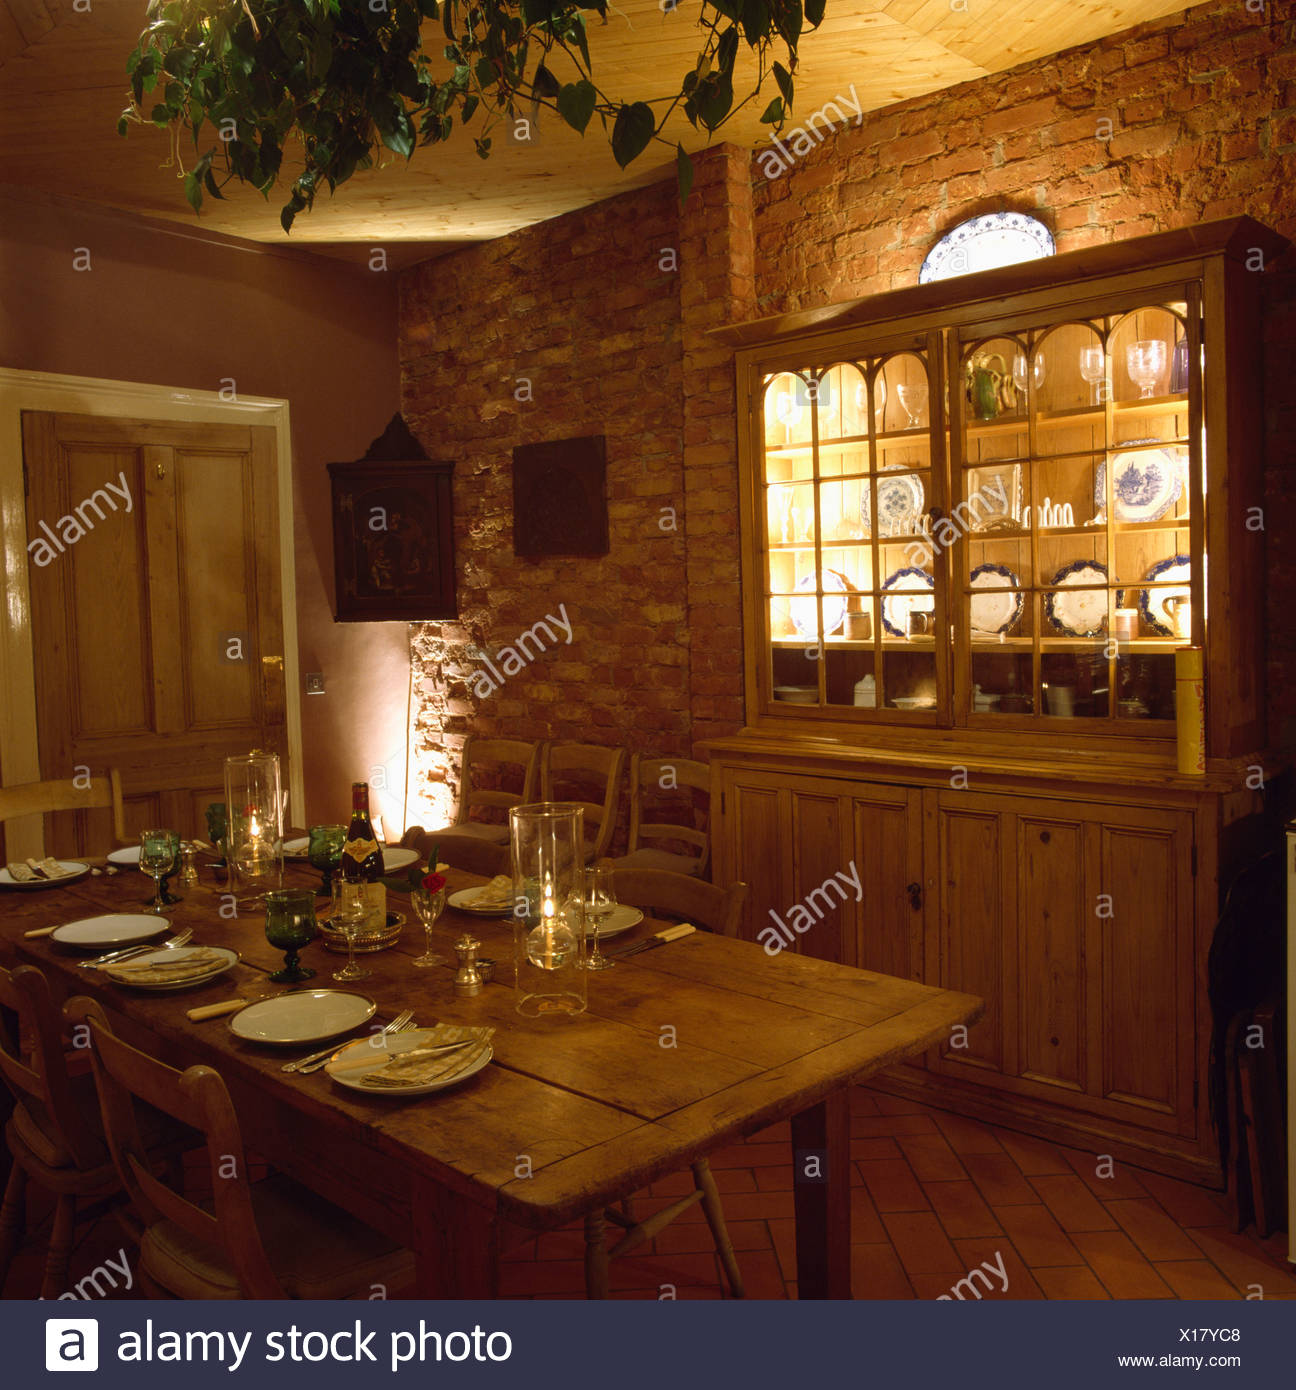 Lighted Shelves In Pine Dresser In Dining Room With Brick Walls